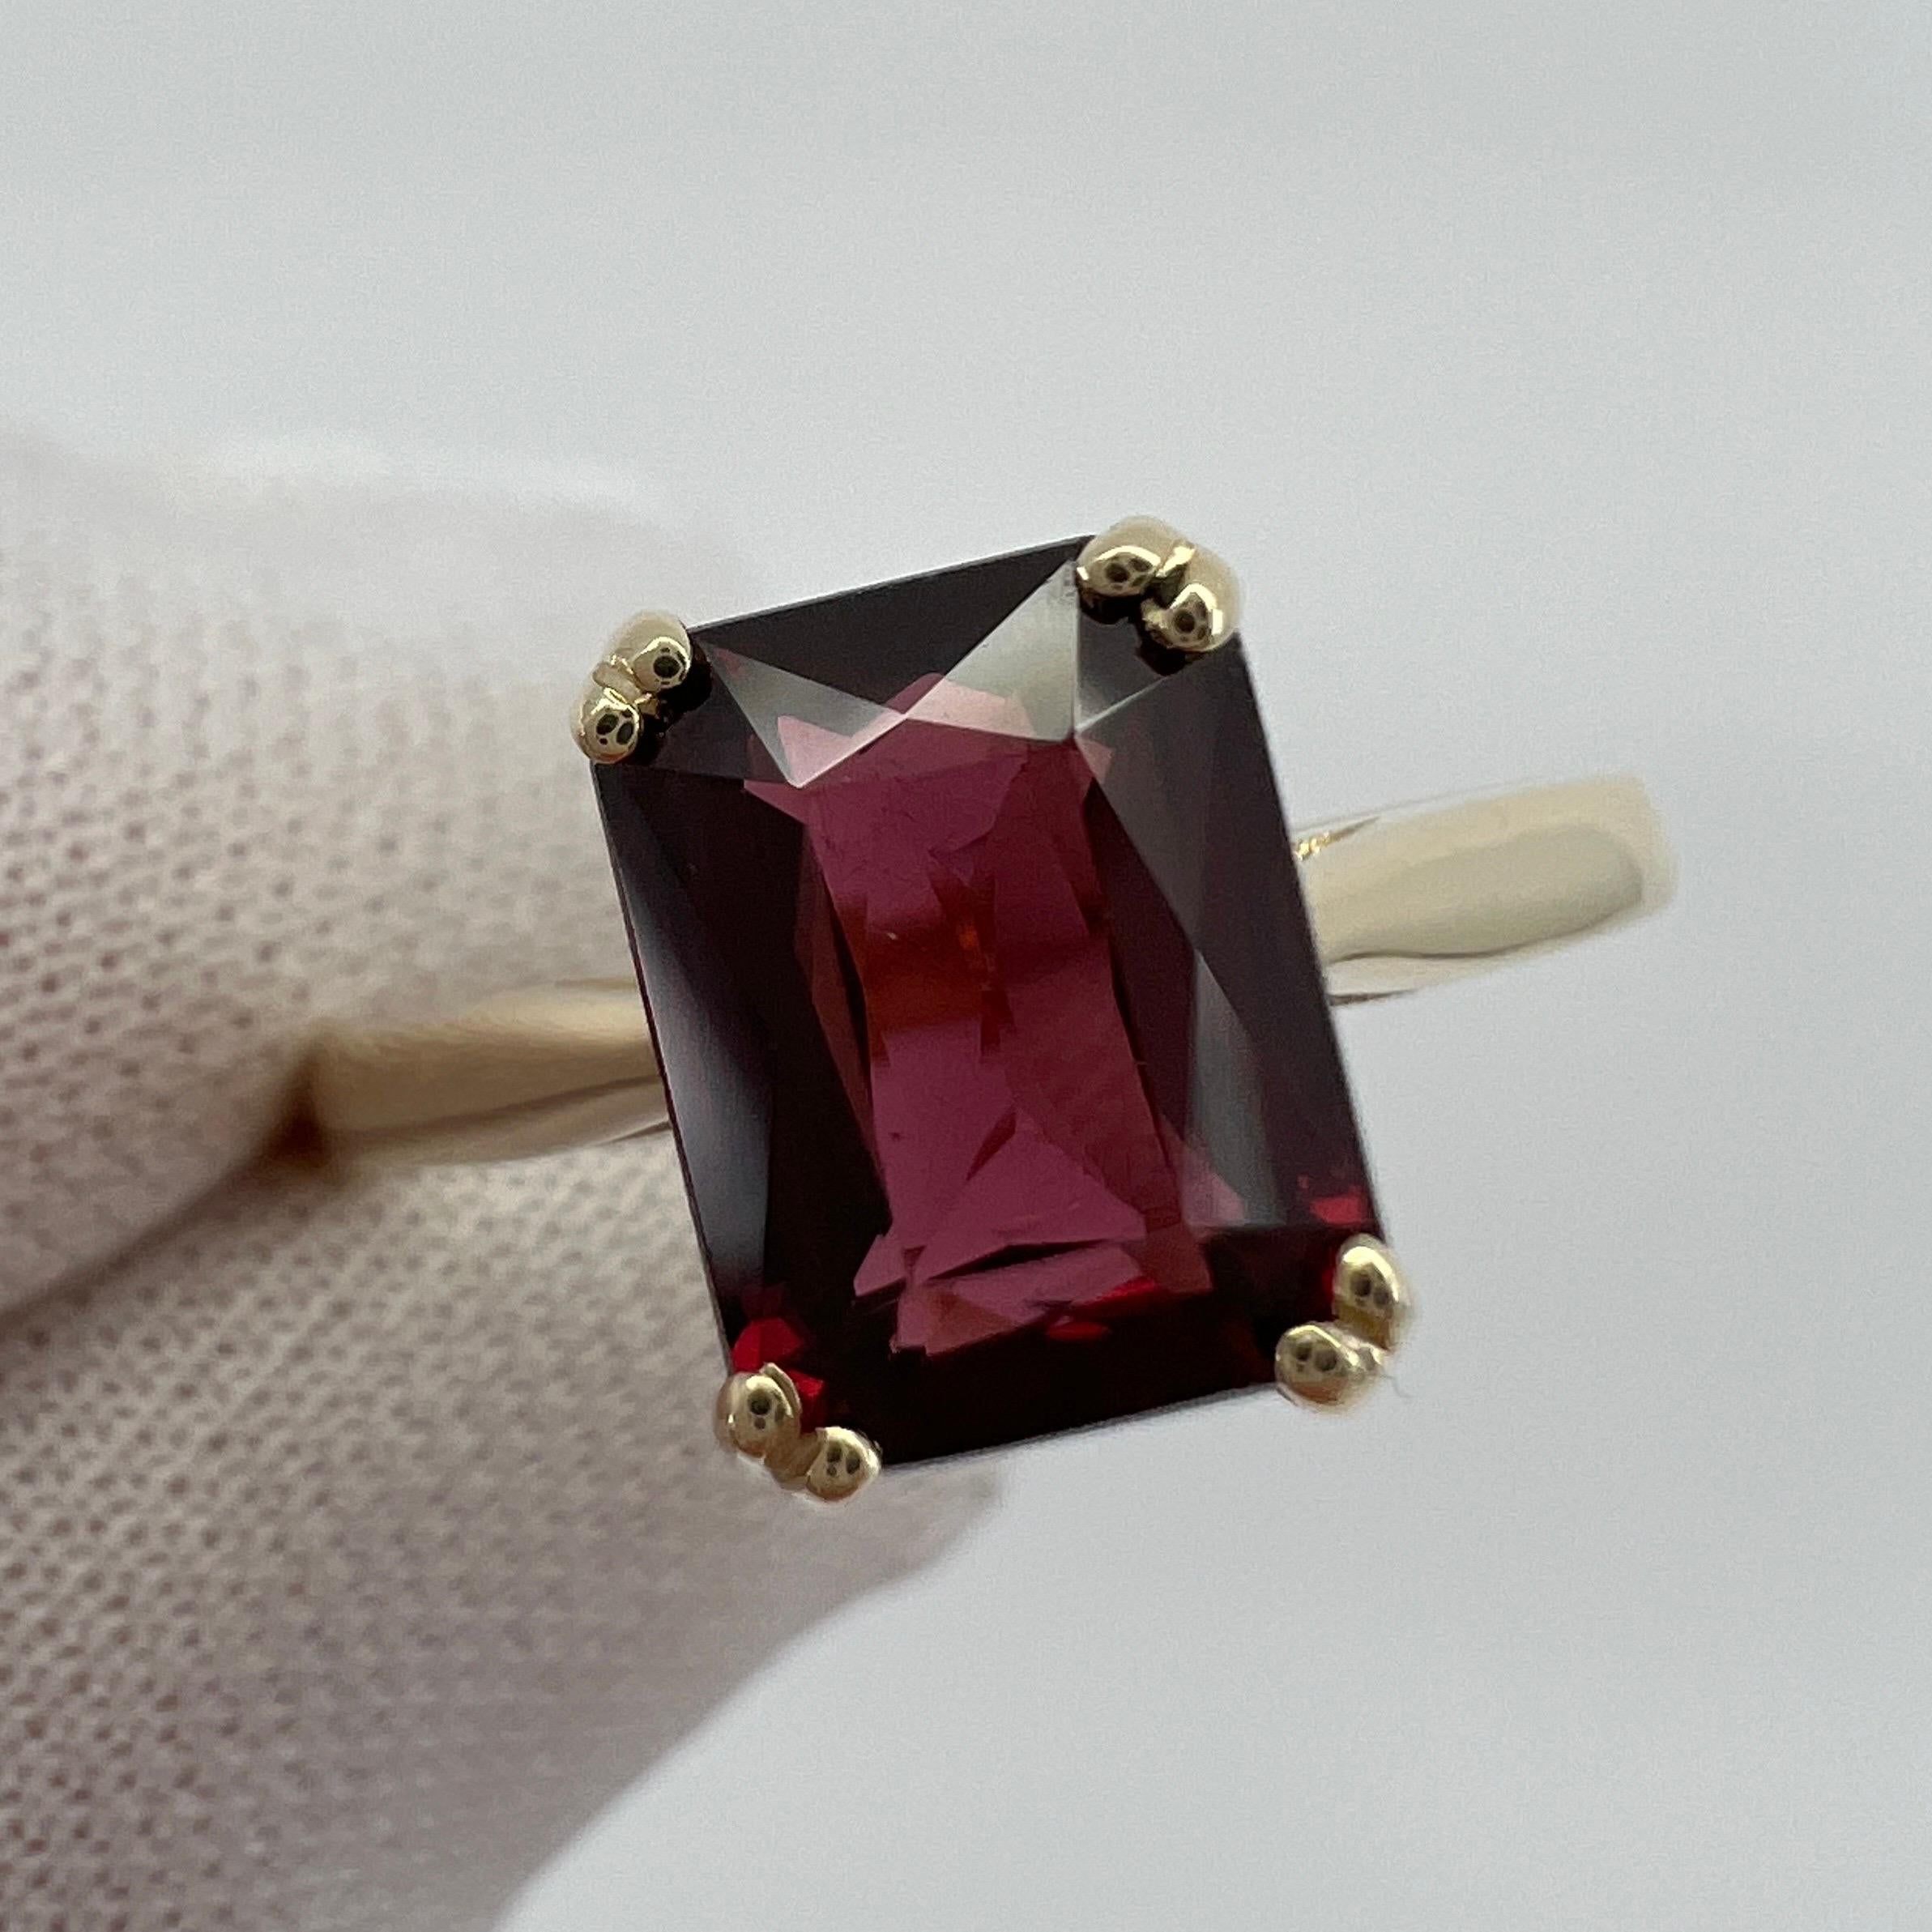 Vivid Pink Purple Rhodolite Garnet Emerald Octagonal Cut Yellow Gold Solitaire Ring.

2.23 Carat garnet with a stunning vivid pink purple colour and excellent clarity, very clean stone.

Also has an excellent quality fancy 'scissor' emerald octagon